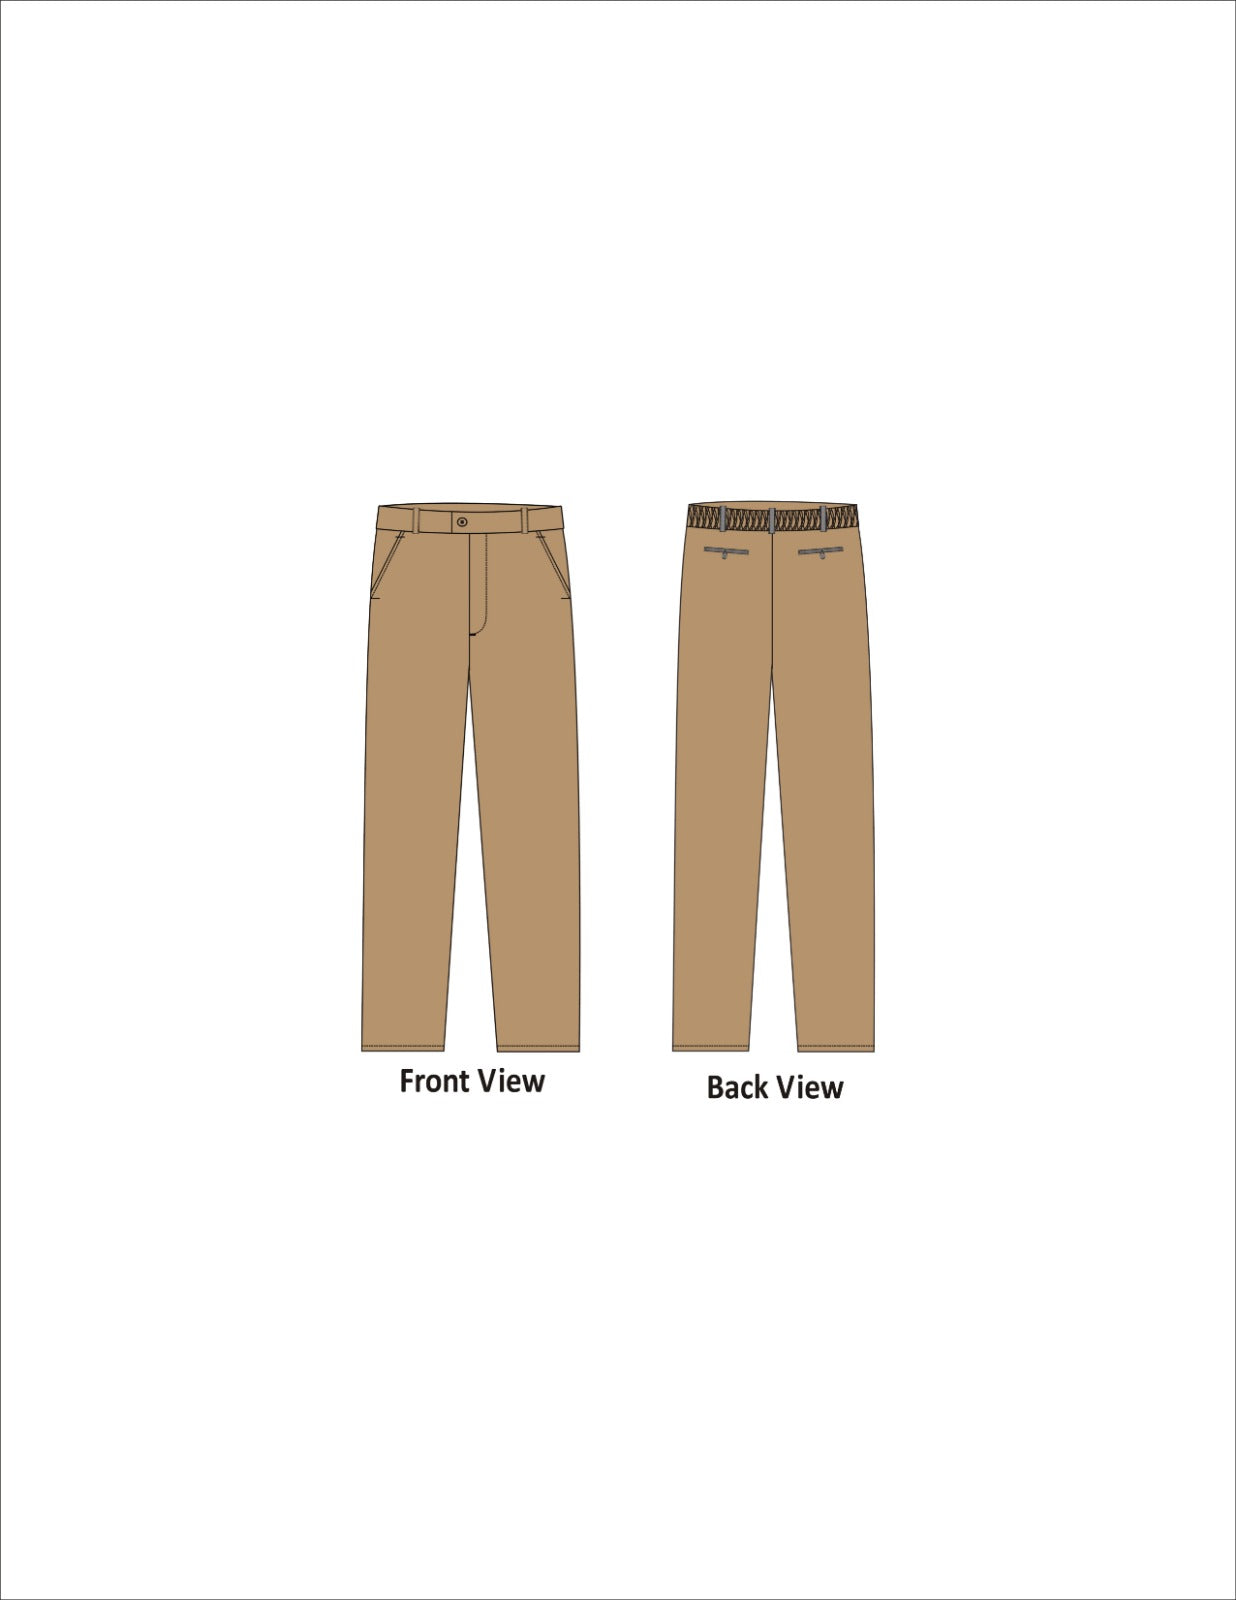 PANT KHAKI FOR BOYS ROOTS IVY ( LENGHT )